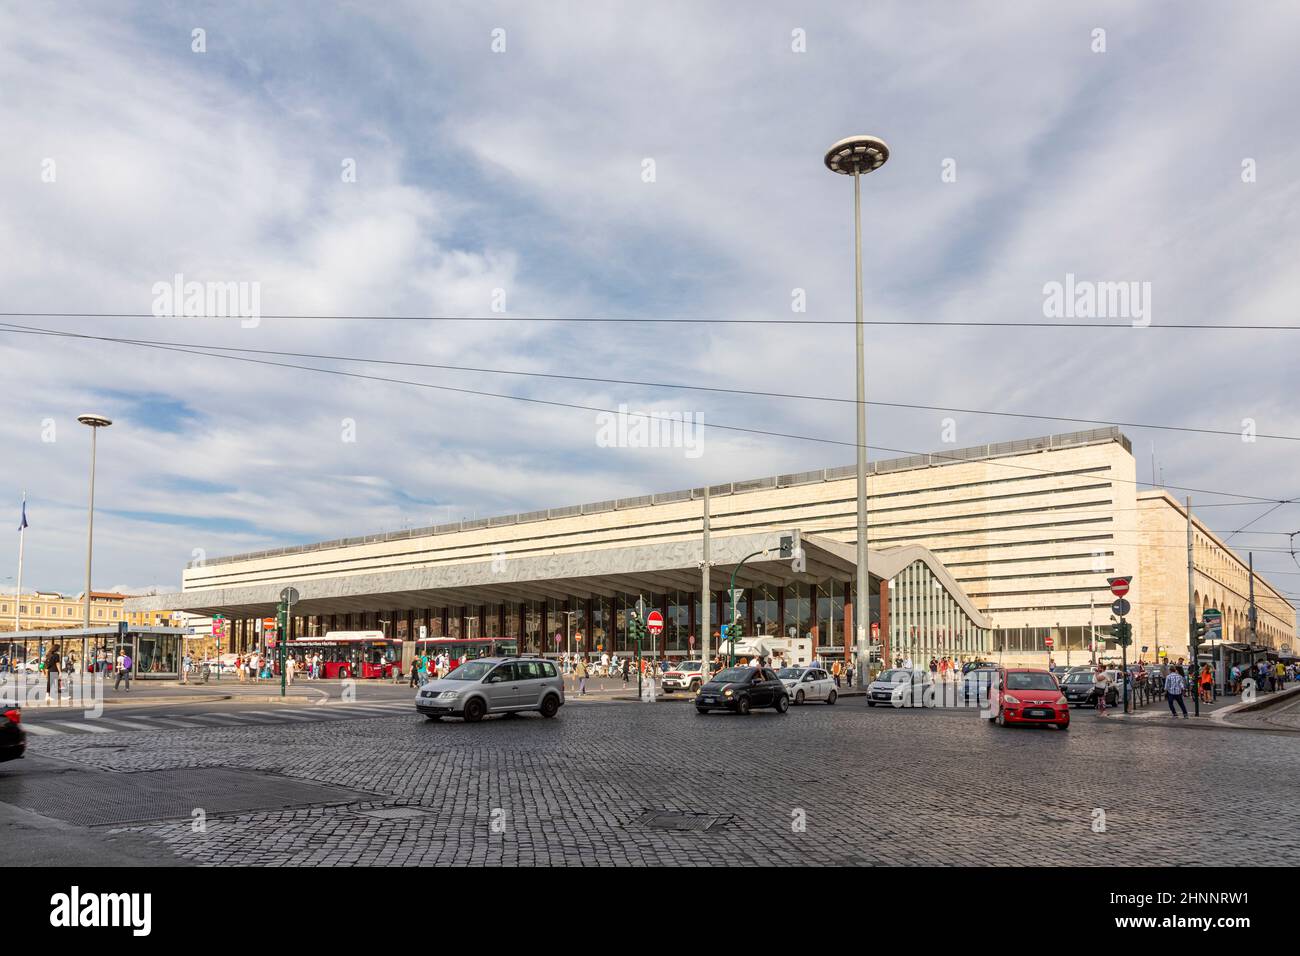 Train Station Termini Romewith parking lot for Busses Stock Photo